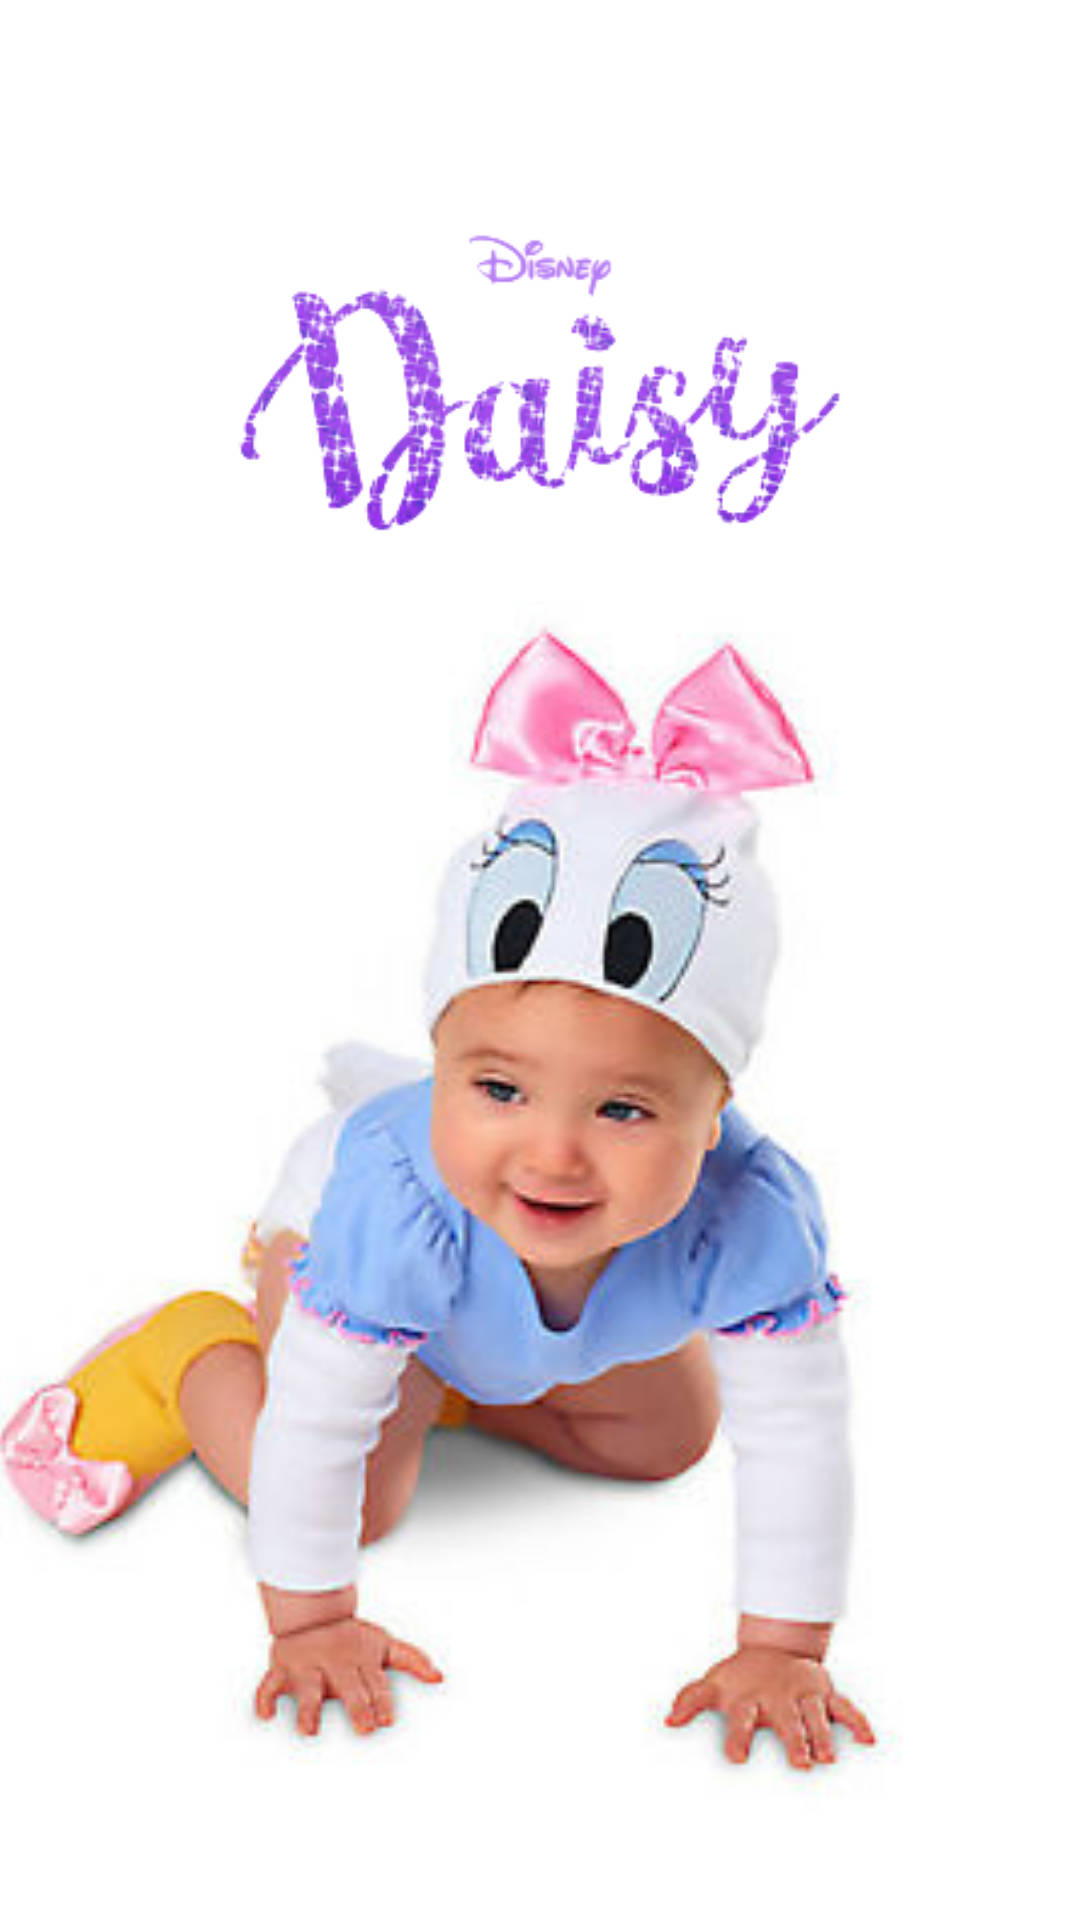 Adorable Baby In Daisy Duck Costume Background